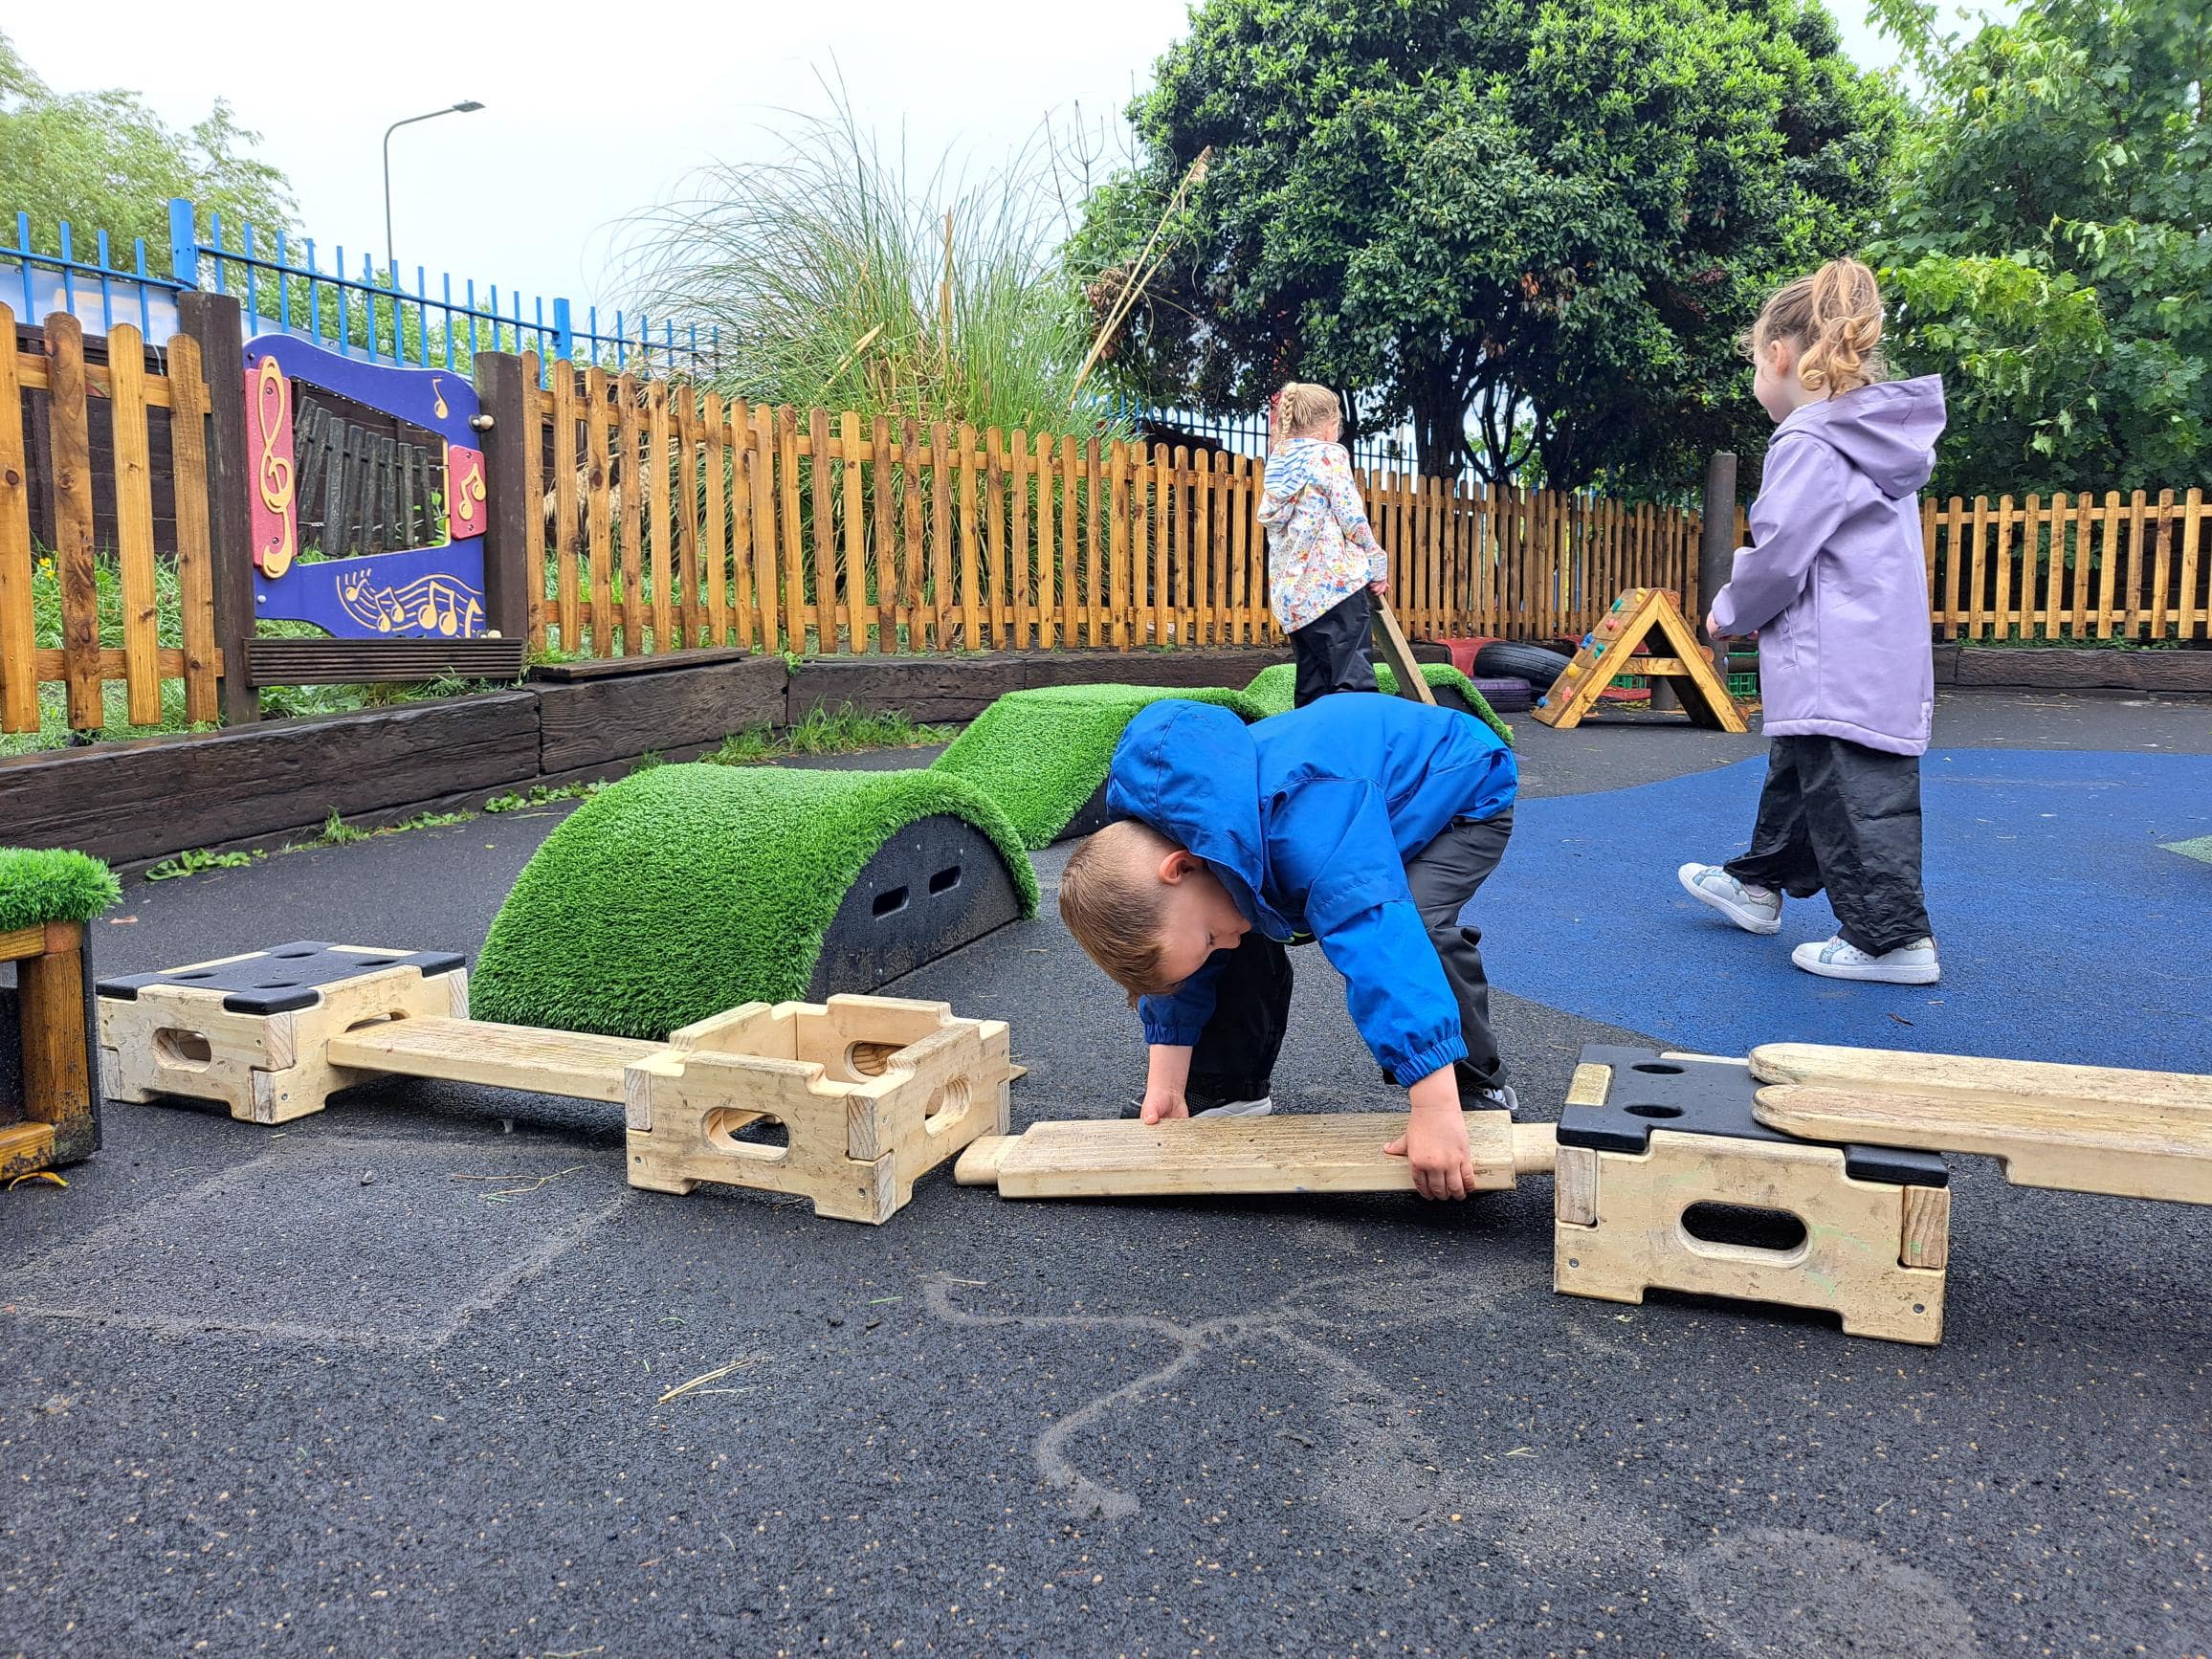 Child connecting a wooden plank to the wooden block contained in the Play Builder sets. Two other children are watching.